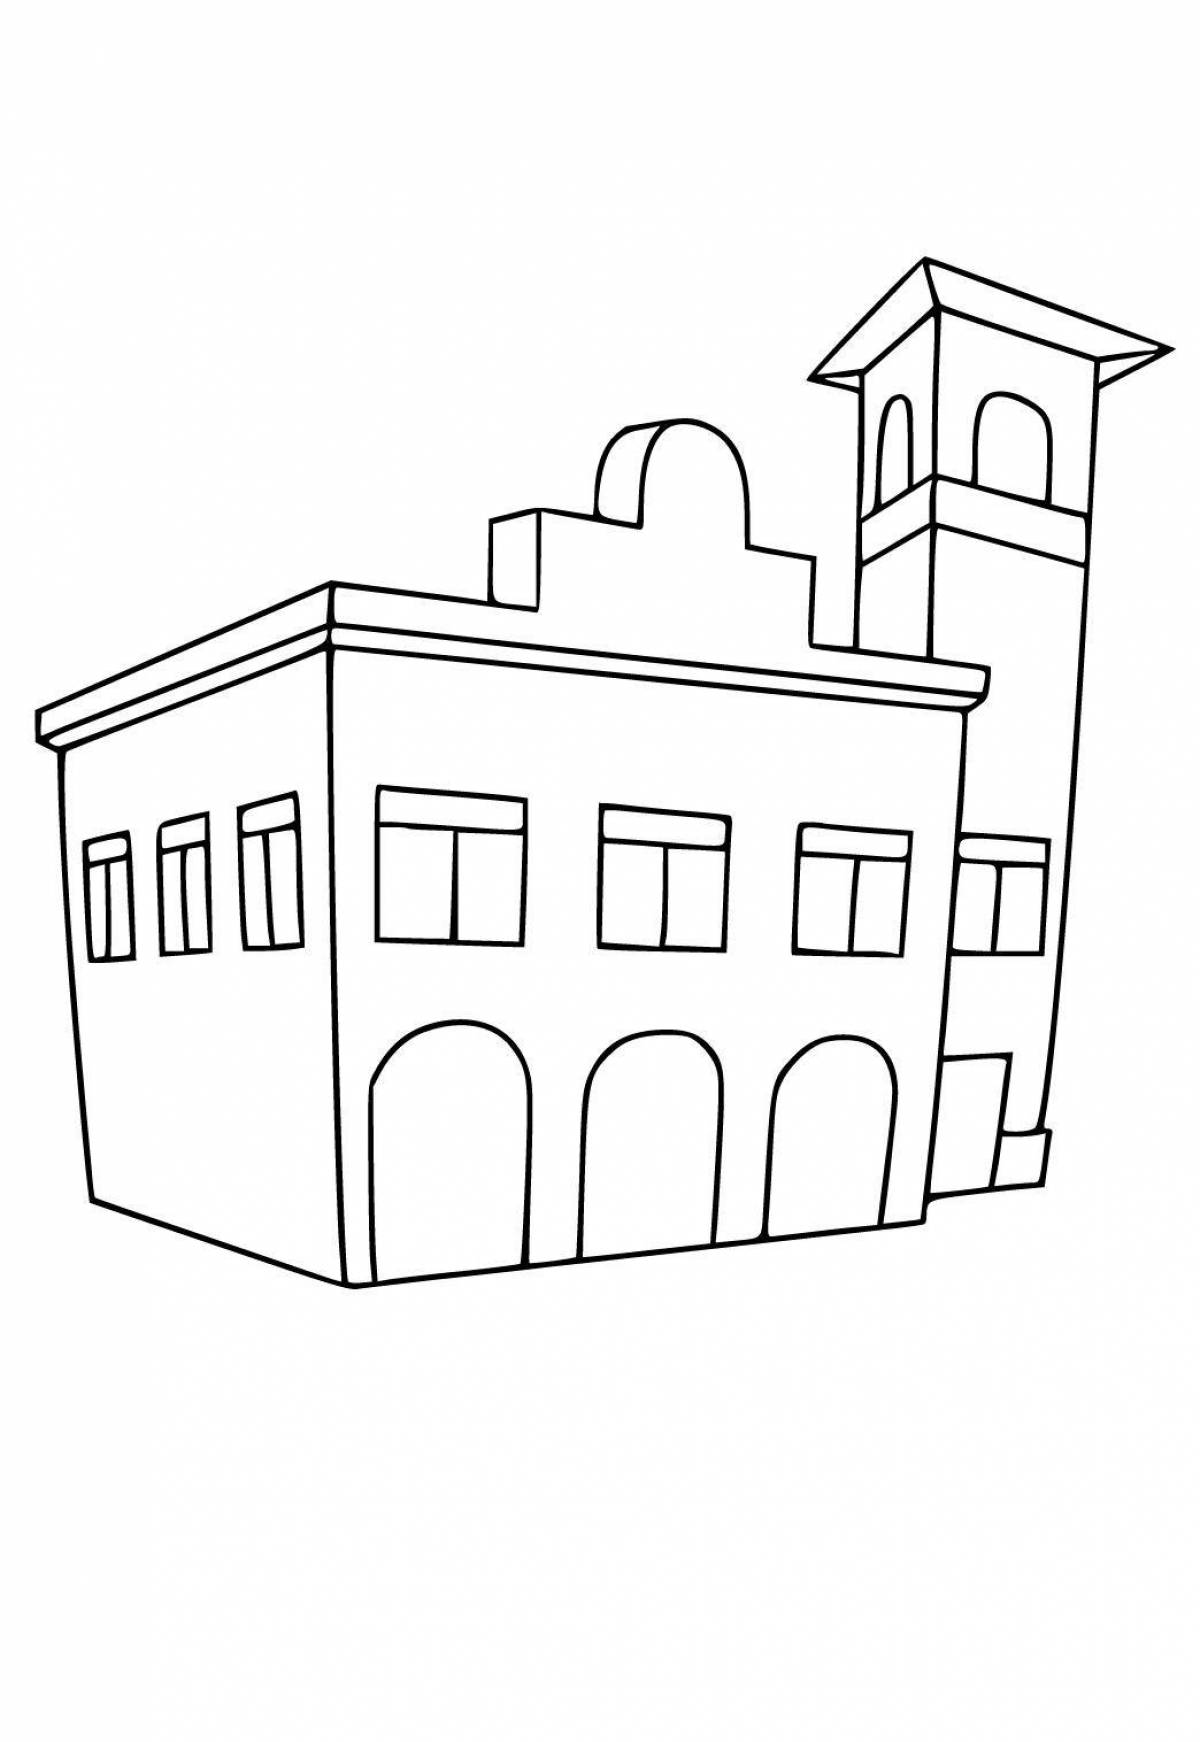 Great fire station coloring page